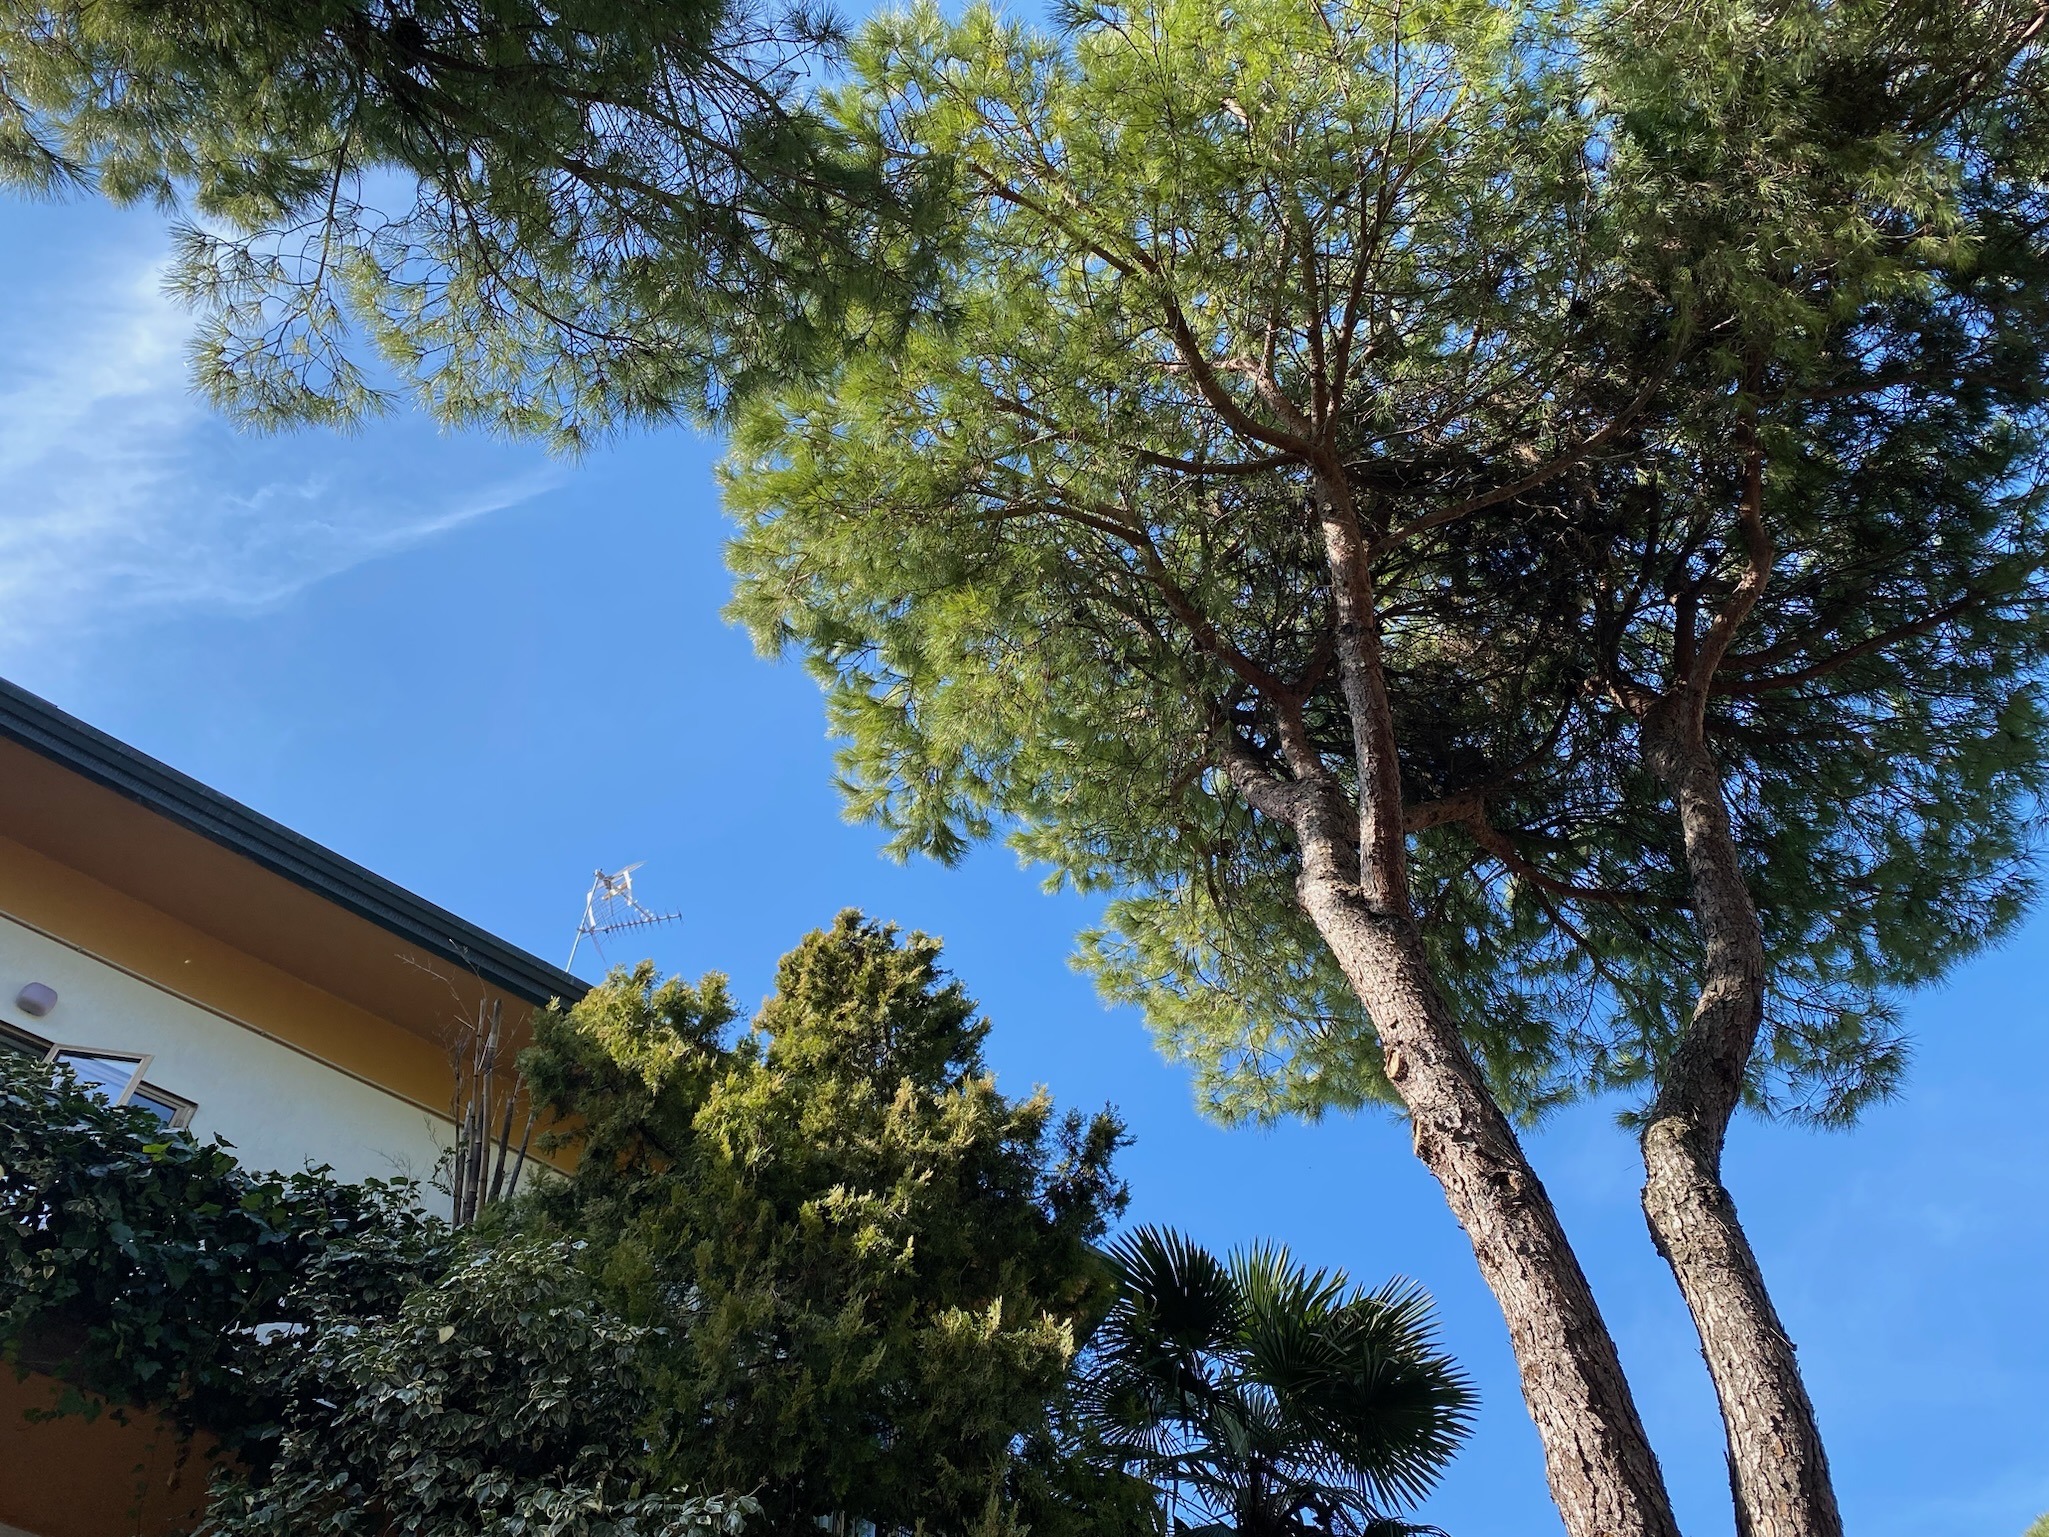 Photo of summer rentals building Villa Susy in a bright day with pine tree and palm tree